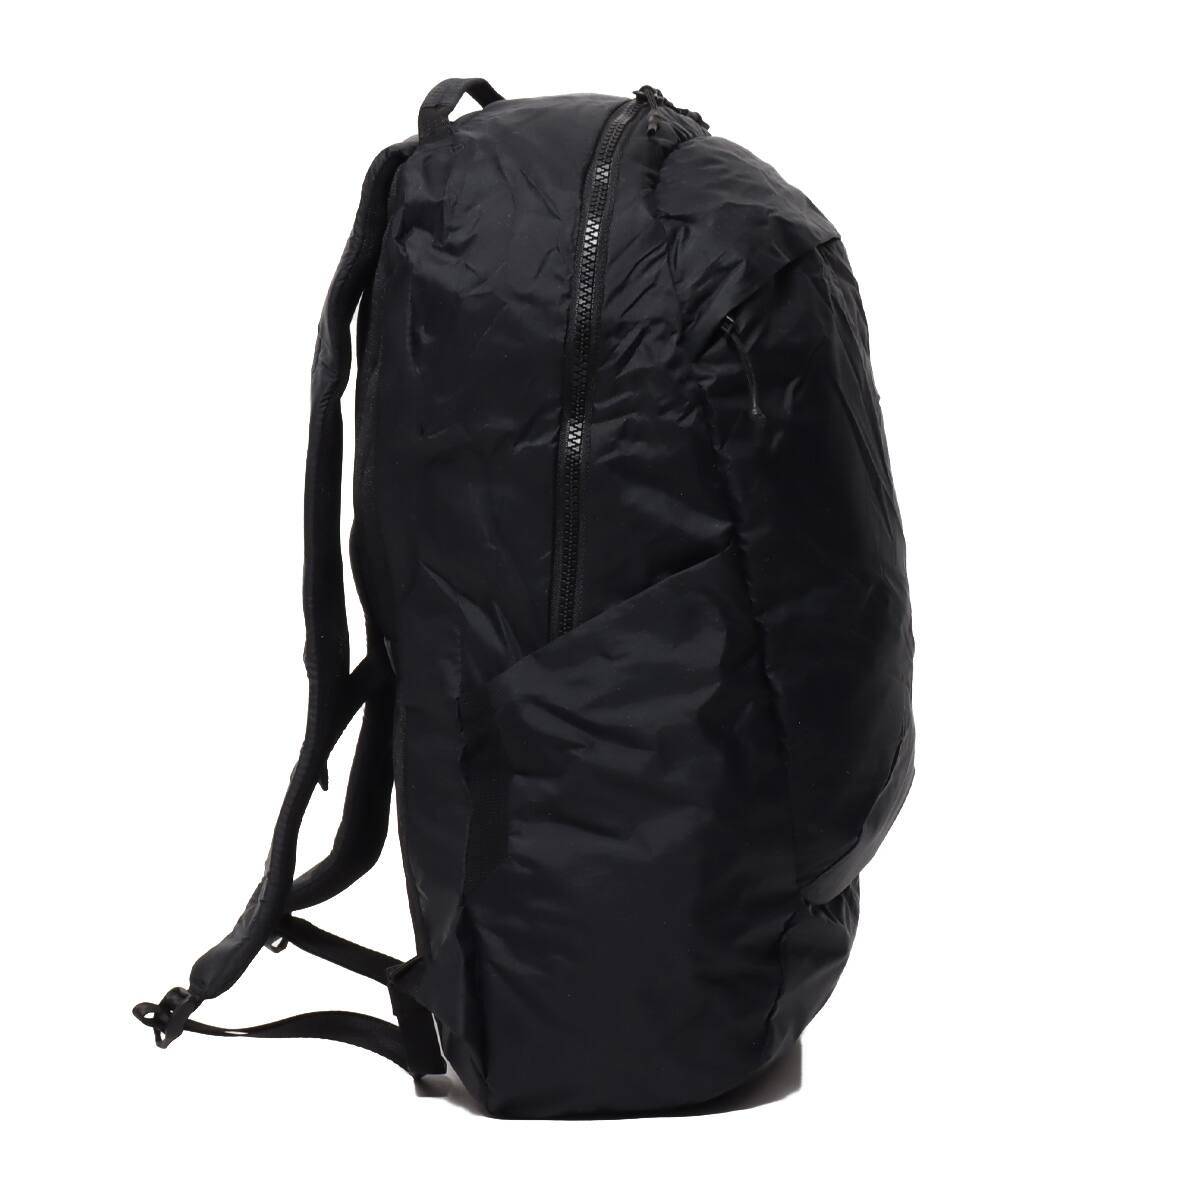 THE NORTH FACE GLAM DAYPACK BLACK 21FW-I